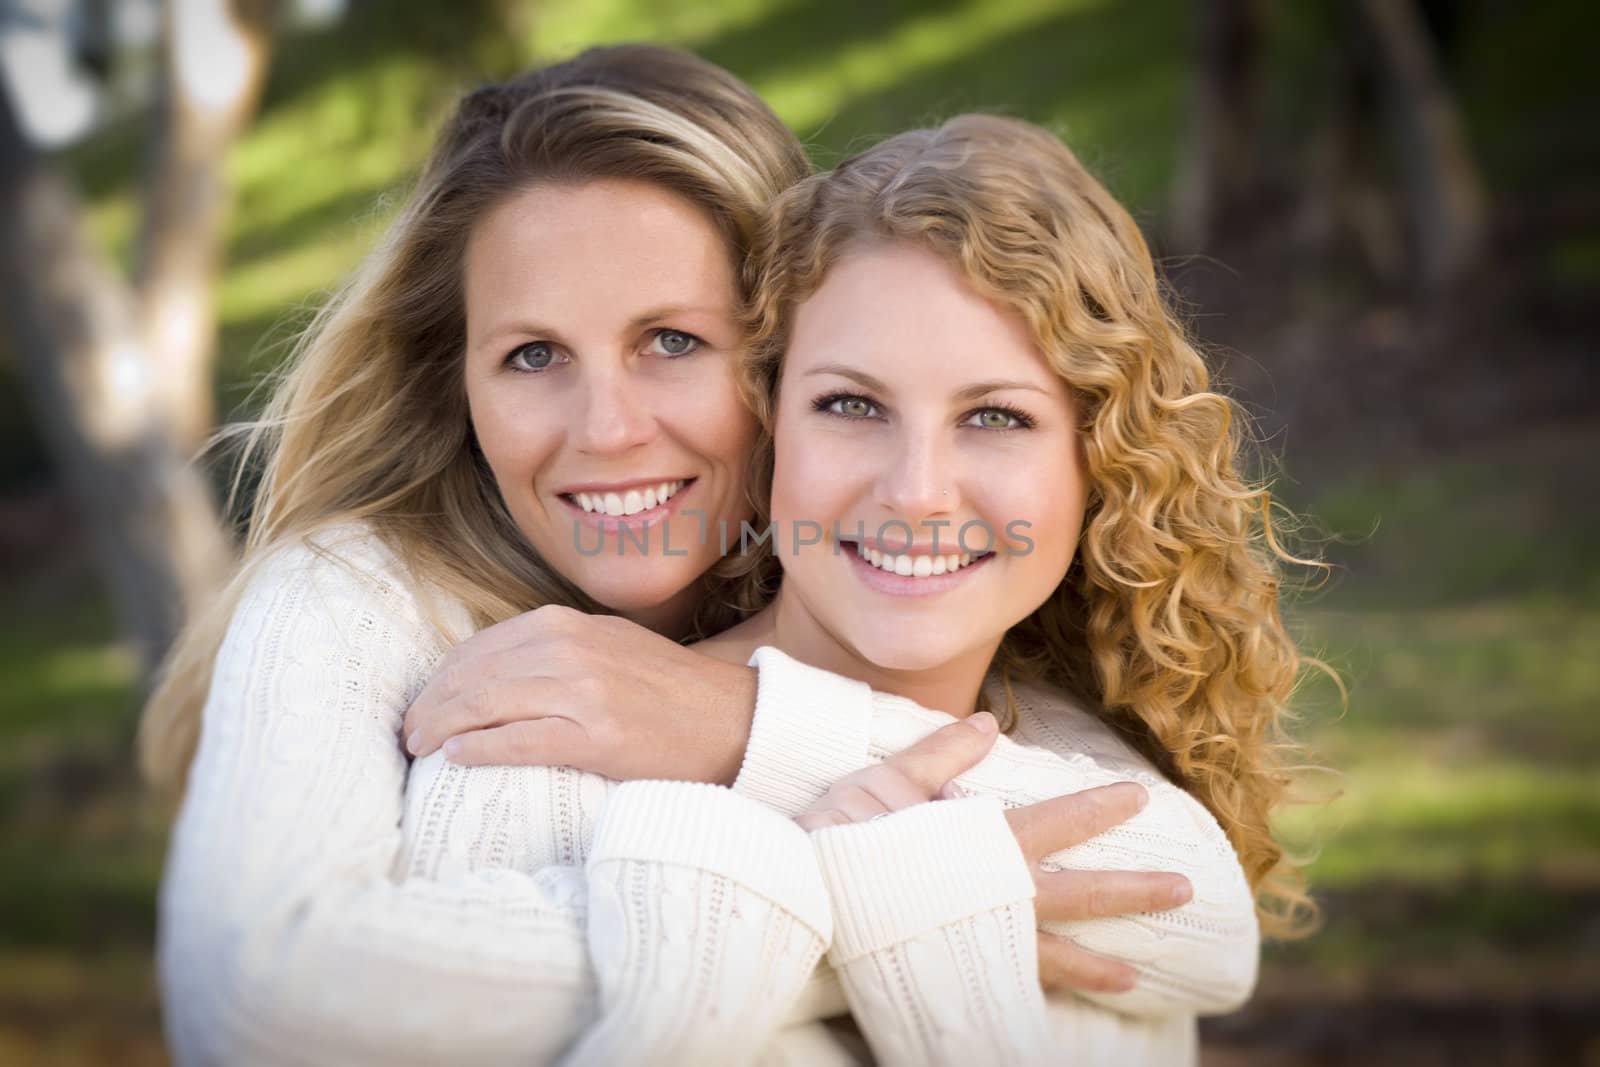 Pretty Mother and Daughter Portrait in Park by Feverpitched